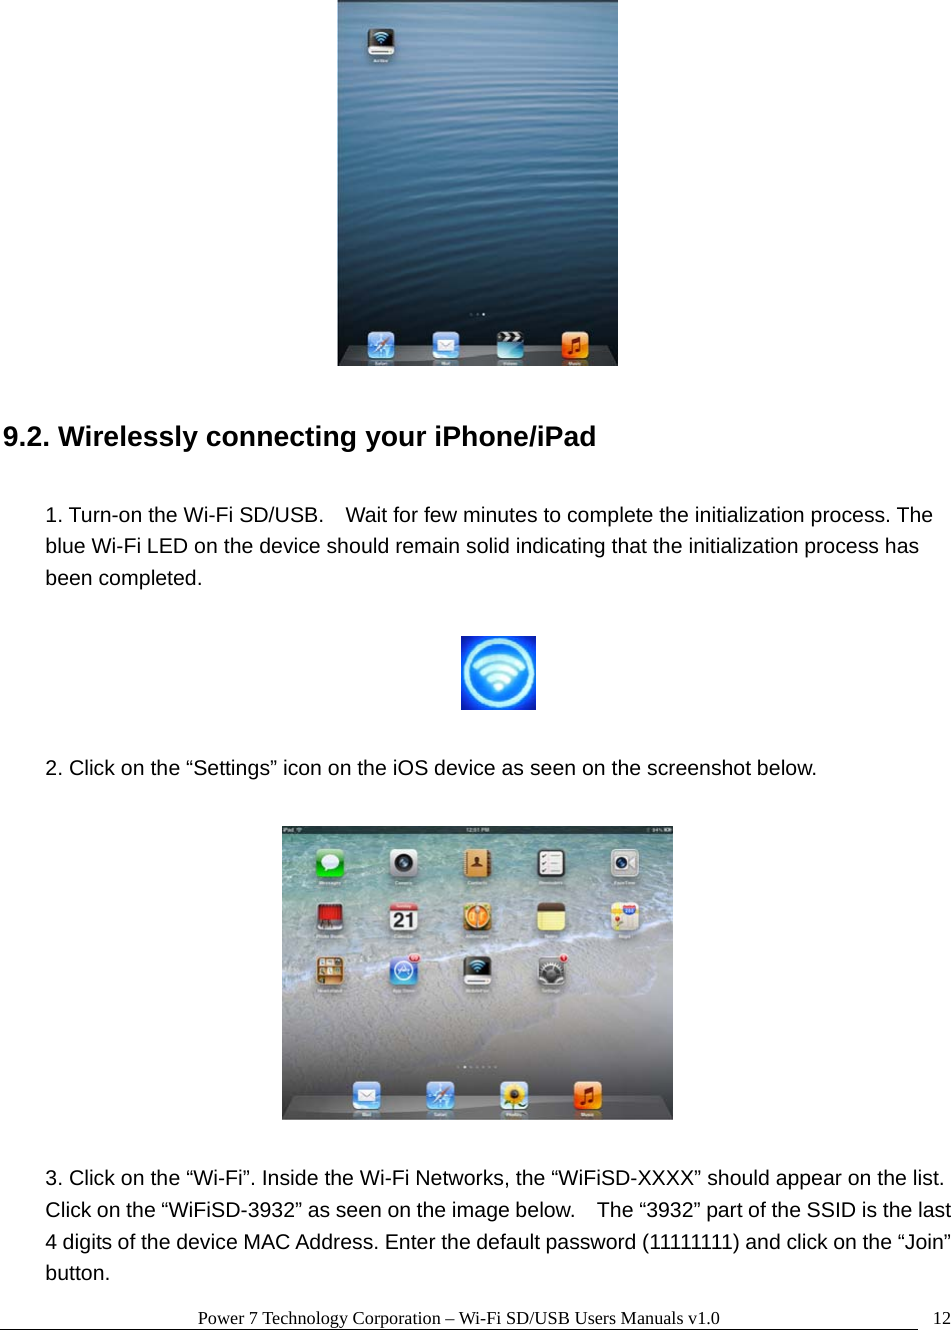 Power 7 Technology Corporation – Wi-Fi SD/USB Users Manuals v1.0  12  9.2. Wirelessly connecting your iPhone/iPad  1. Turn-on the Wi-Fi SD/USB.    Wait for few minutes to complete the initialization process. The blue Wi-Fi LED on the device should remain solid indicating that the initialization process has been completed.    2. Click on the “Settings” icon on the iOS device as seen on the screenshot below.    3. Click on the “Wi-Fi”. Inside the Wi-Fi Networks, the “WiFiSD-XXXX” should appear on the list.   Click on the “WiFiSD-3932” as seen on the image below.    The “3932” part of the SSID is the last 4 digits of the device MAC Address. Enter the default password (11111111) and click on the “Join” button. 